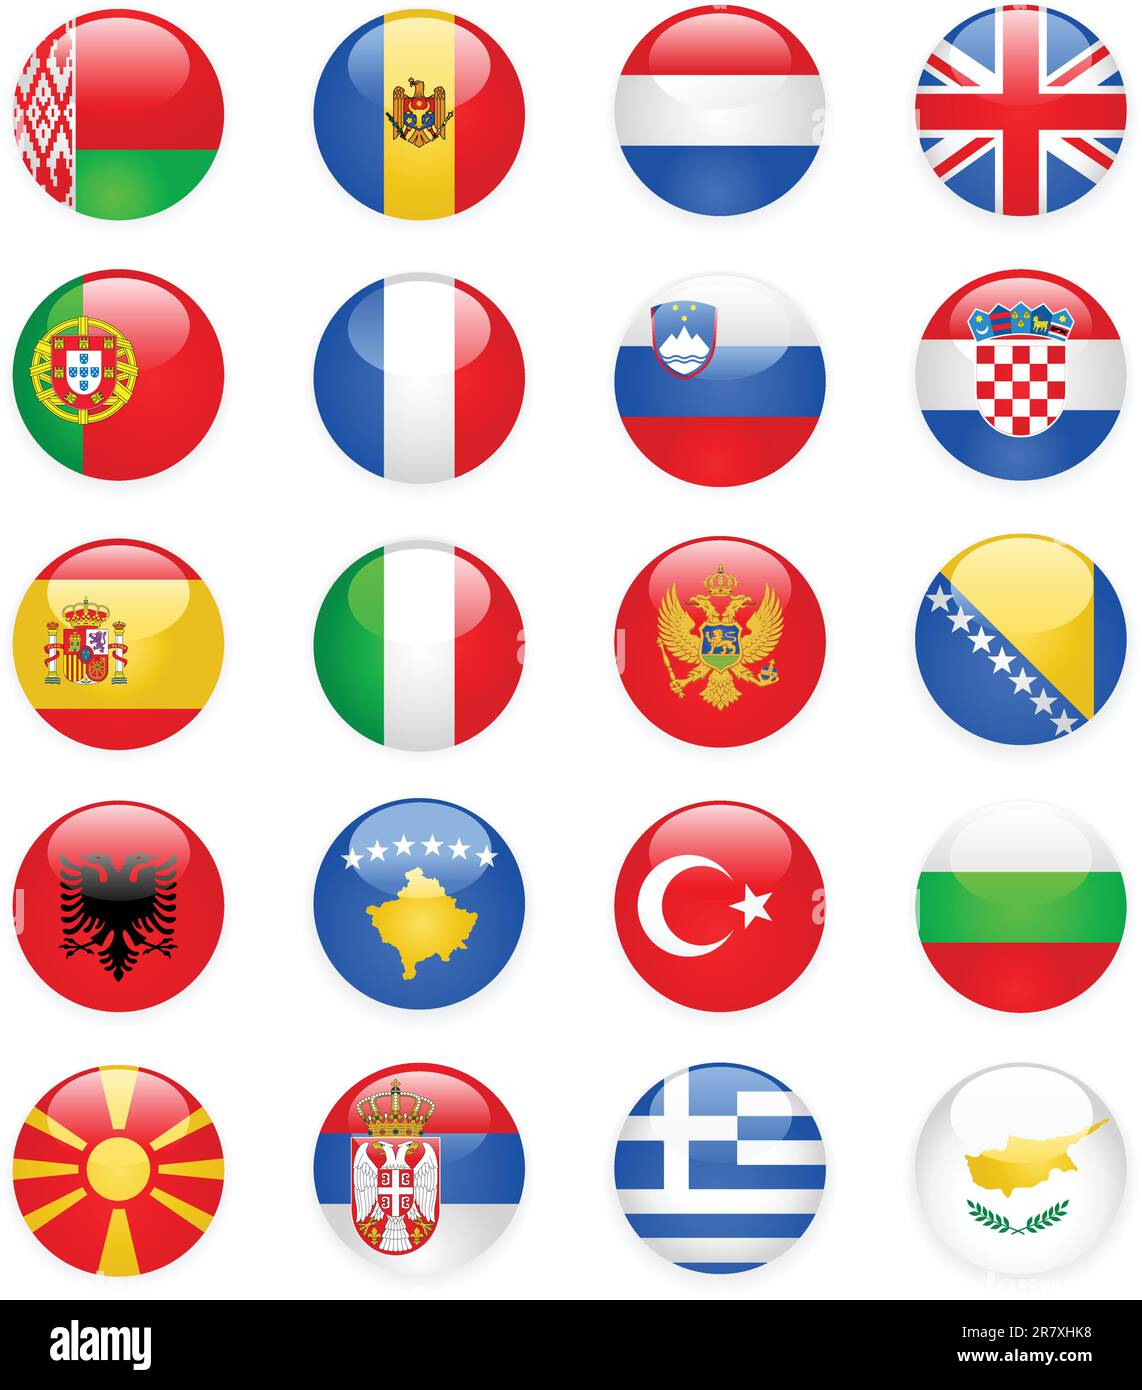 Glossy Europe flags buttons, part one Stock Vector